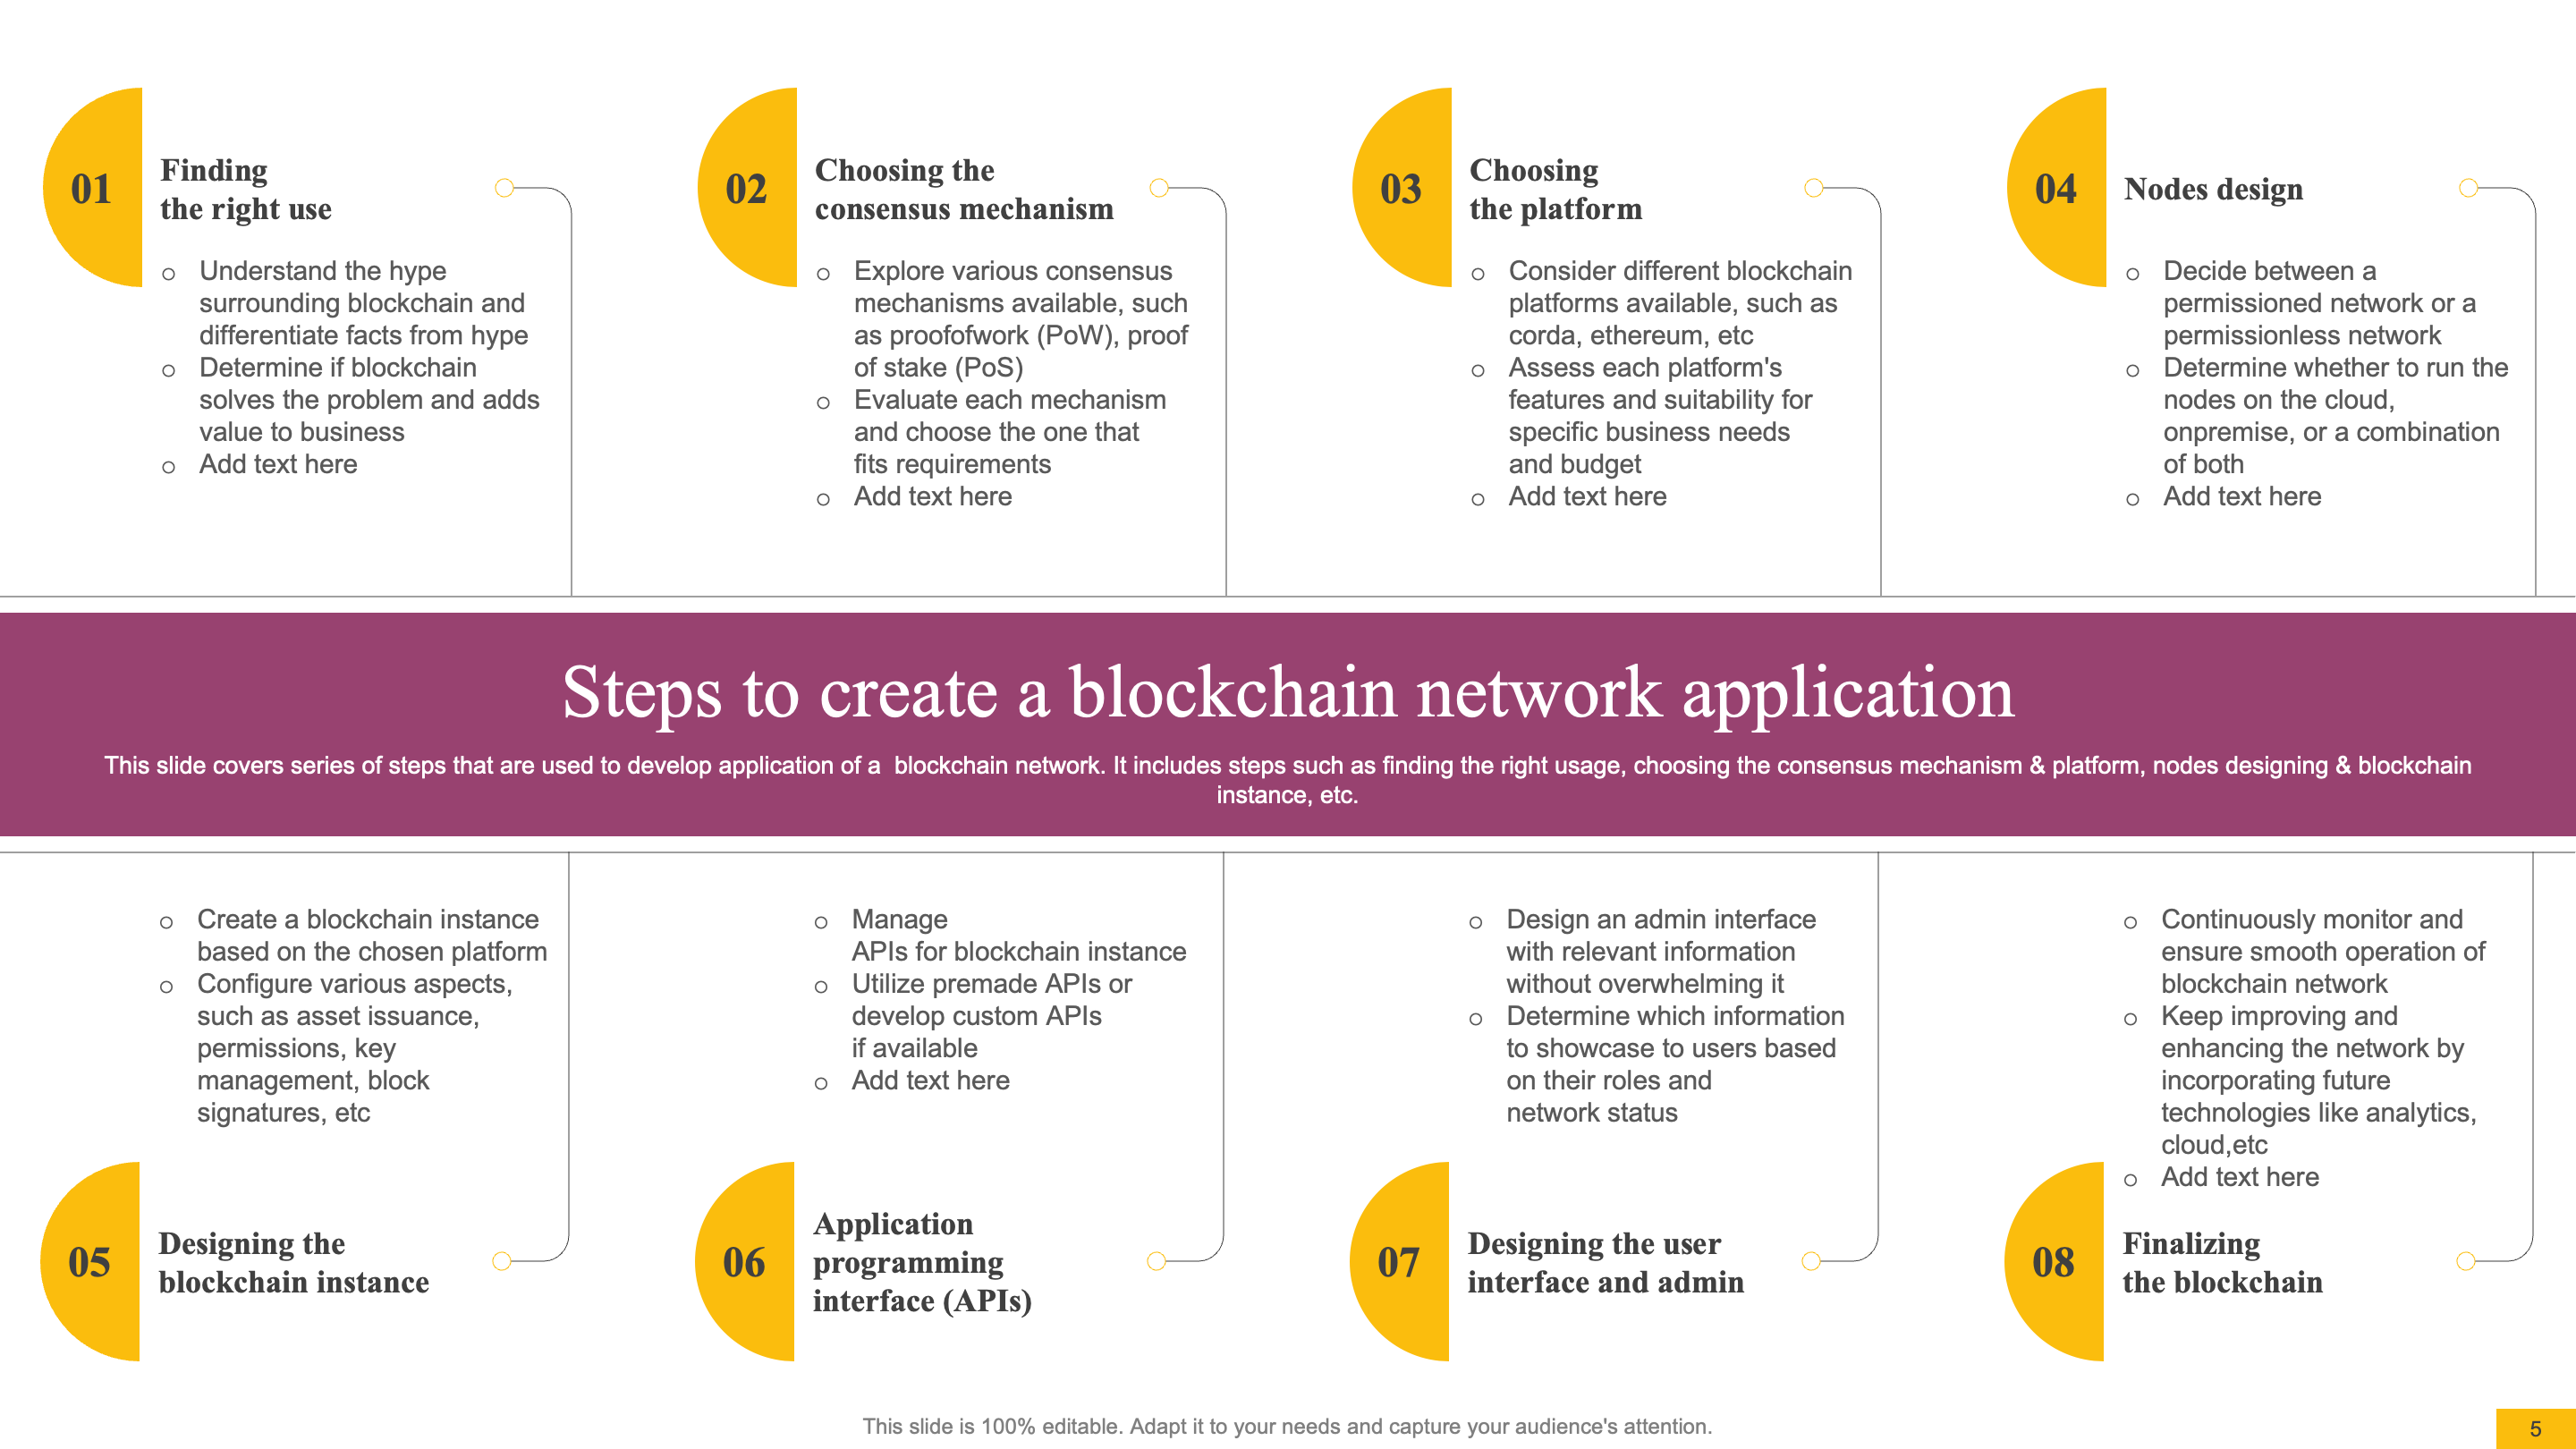 Steps to create a blockchain network application